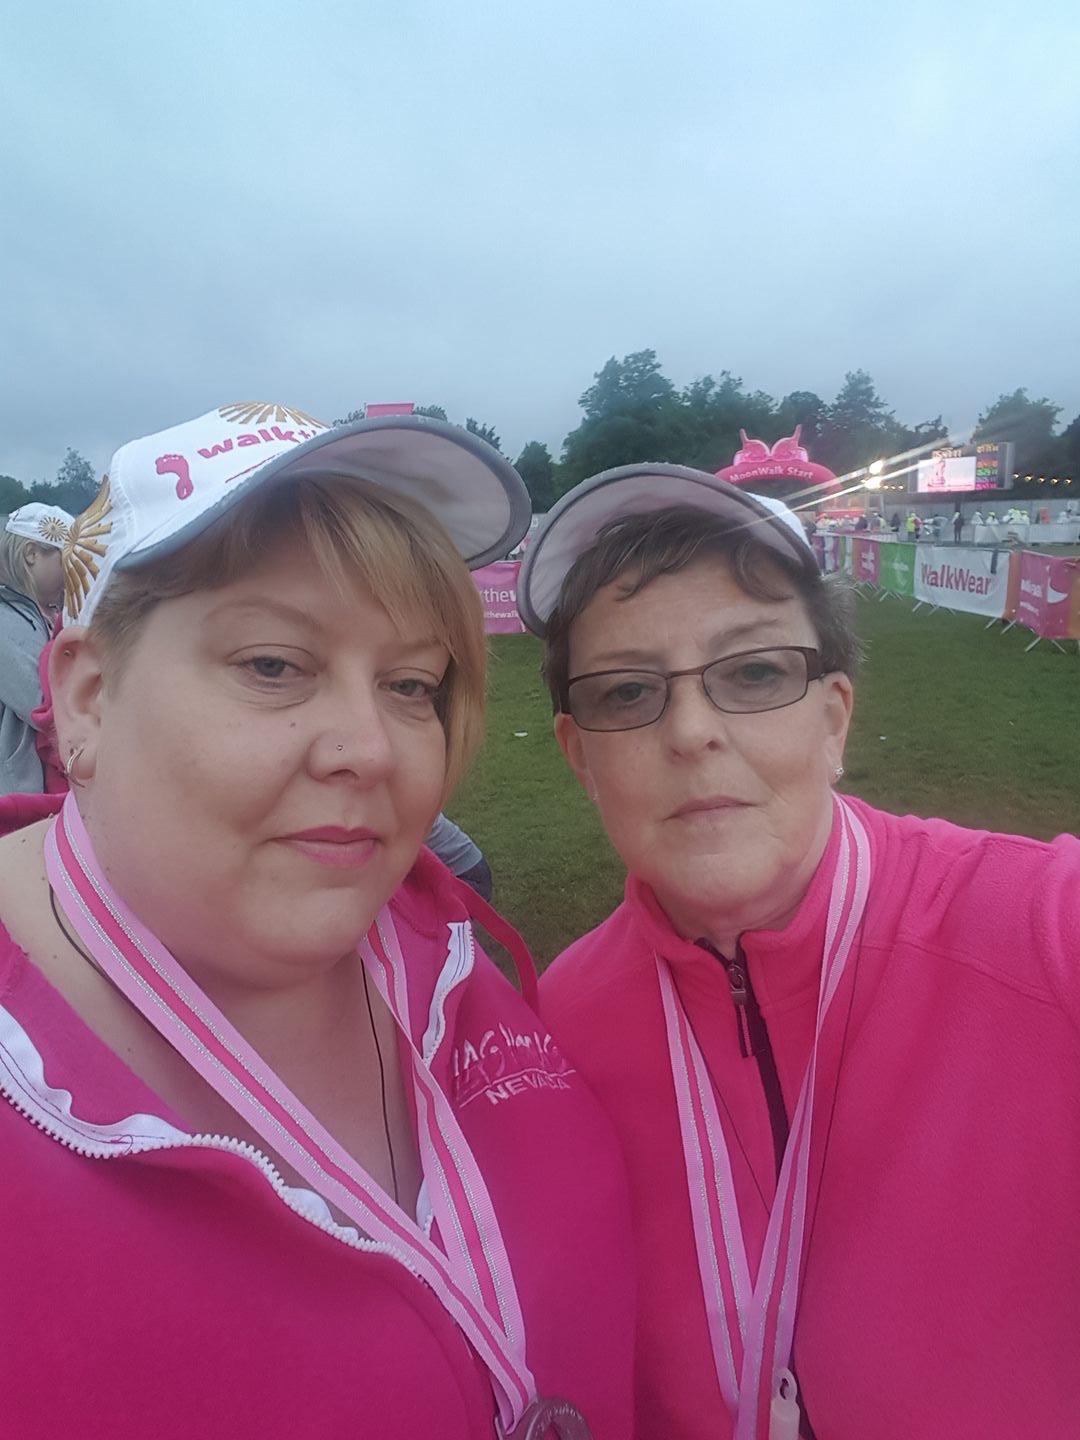 Walk The Walk - Cancer Research - May 2017